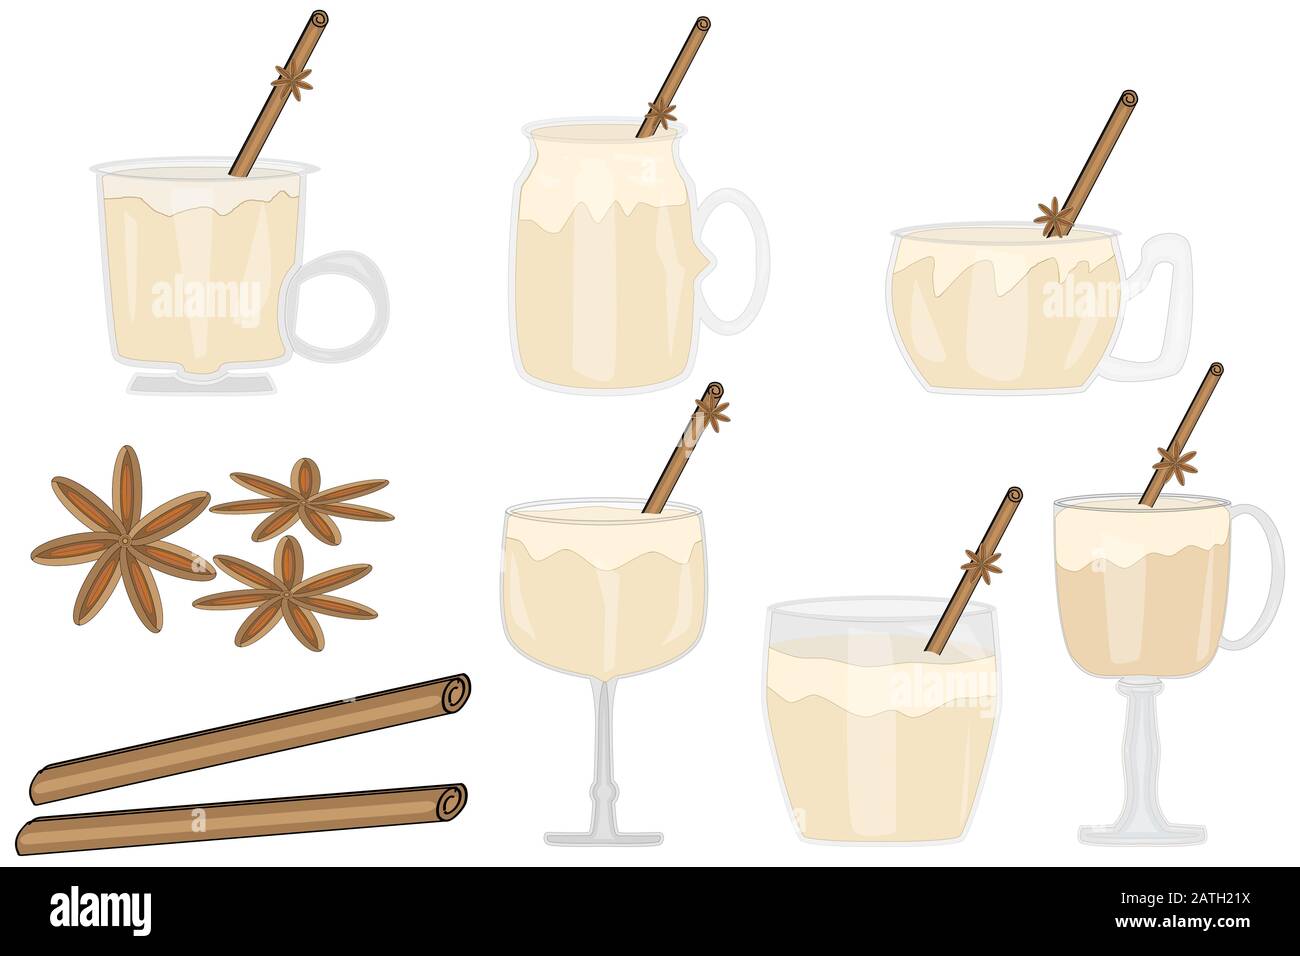 https://c8.alamy.com/comp/2ATH21X/set-of-christmas-drink-egg-nogglasses-winter-drink-of-egg-nog-with-a-cinnamon-stick-egg-nog-isolated-on-white-backgroundtasty-holiday-drinksvector-2ATH21X.jpg